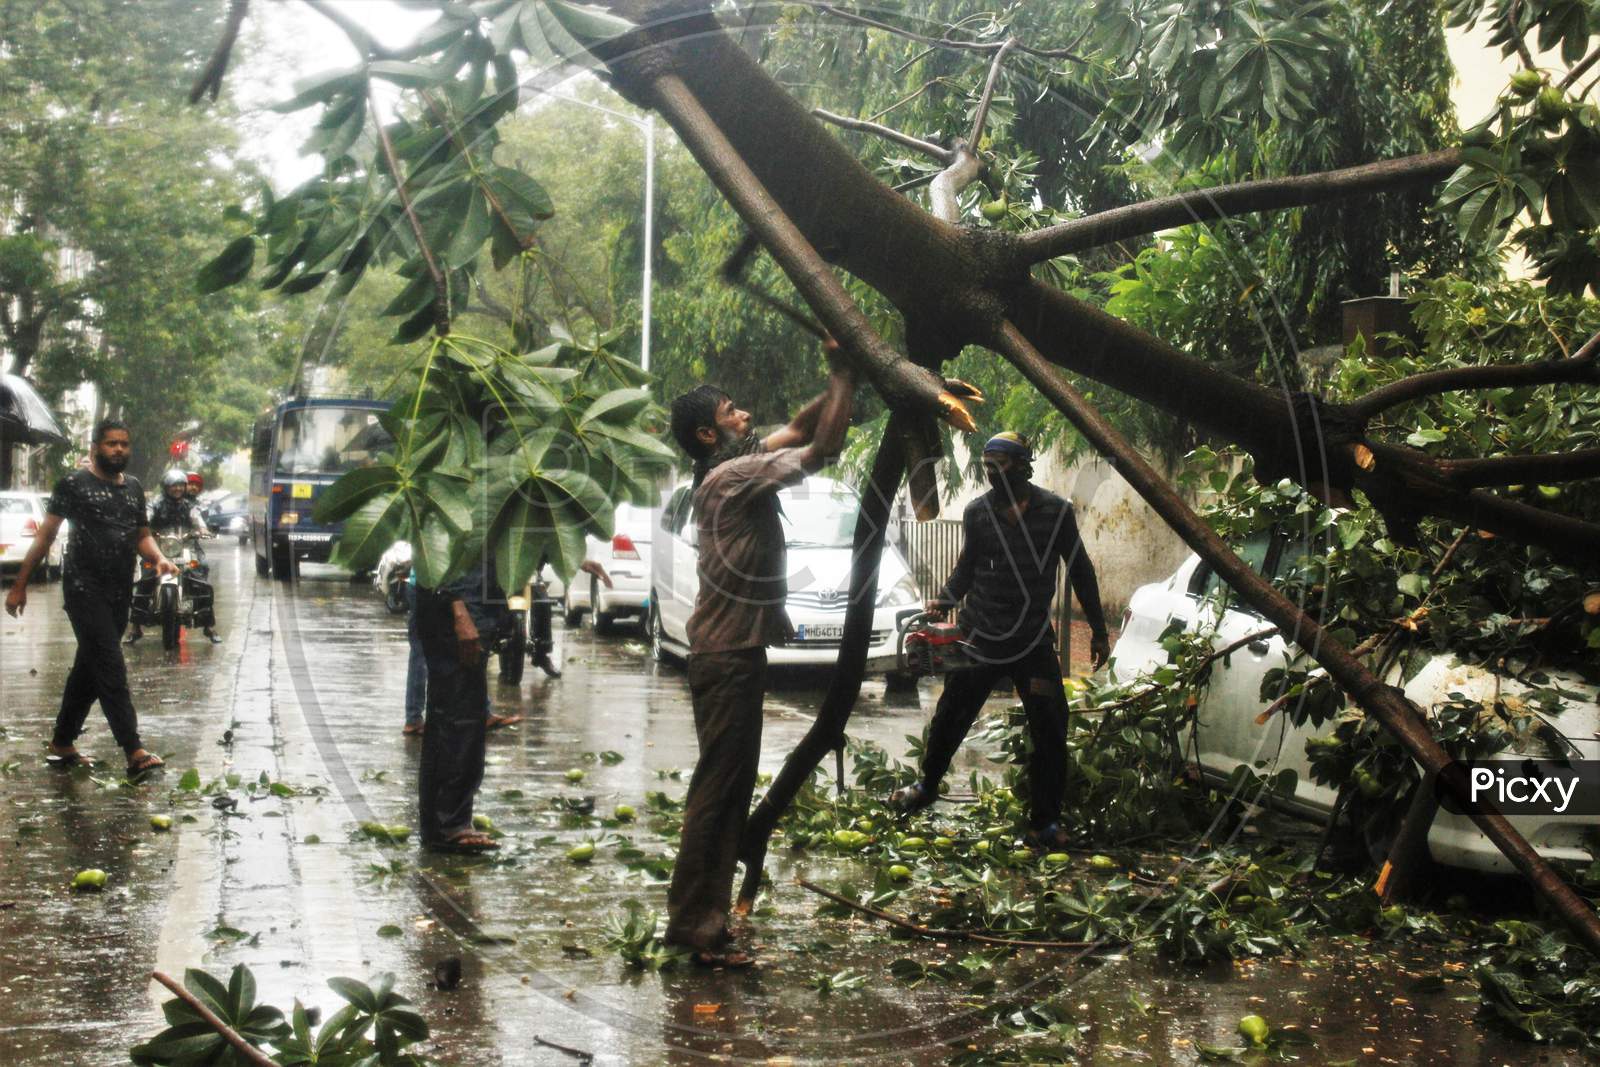 A man cuts the branches of a tree as he attempts to remove it after it fell on a car during heavy rains in Mumbai, India on July 7, 2020.